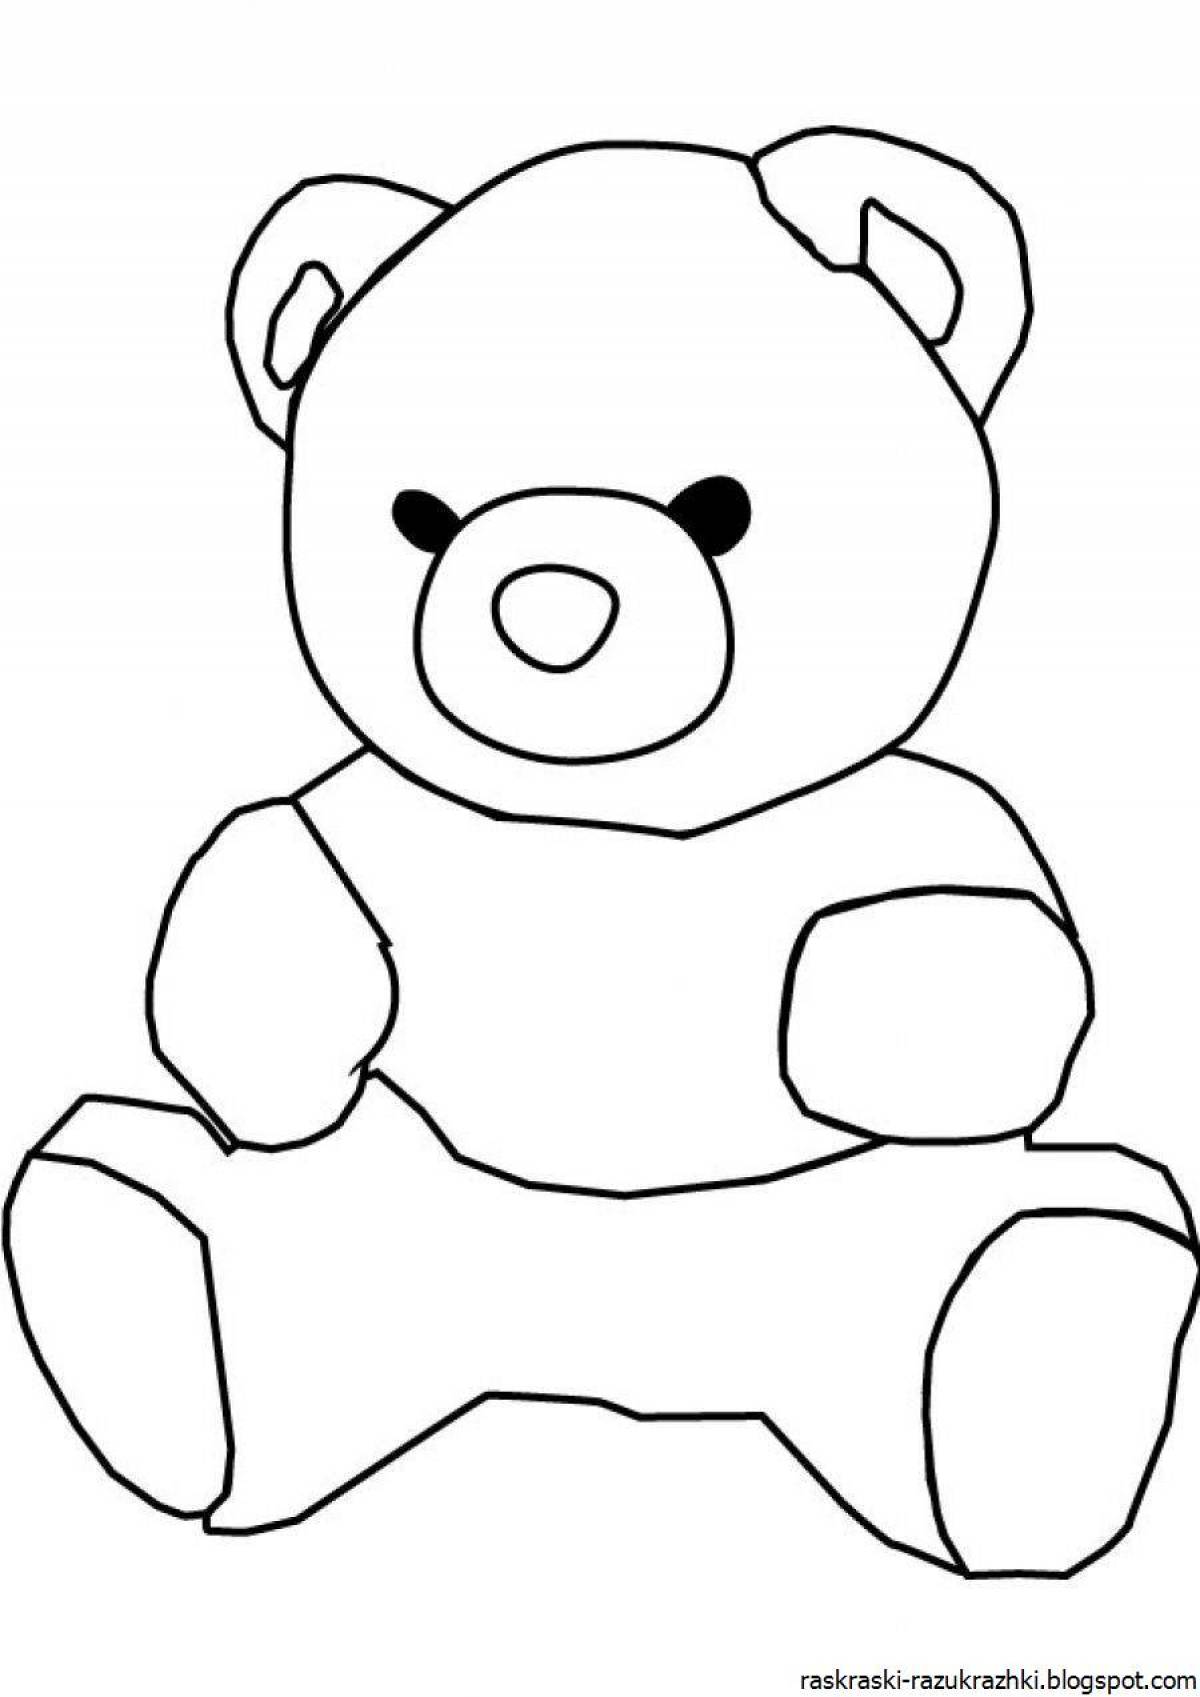 Coloring book winking teddy bear